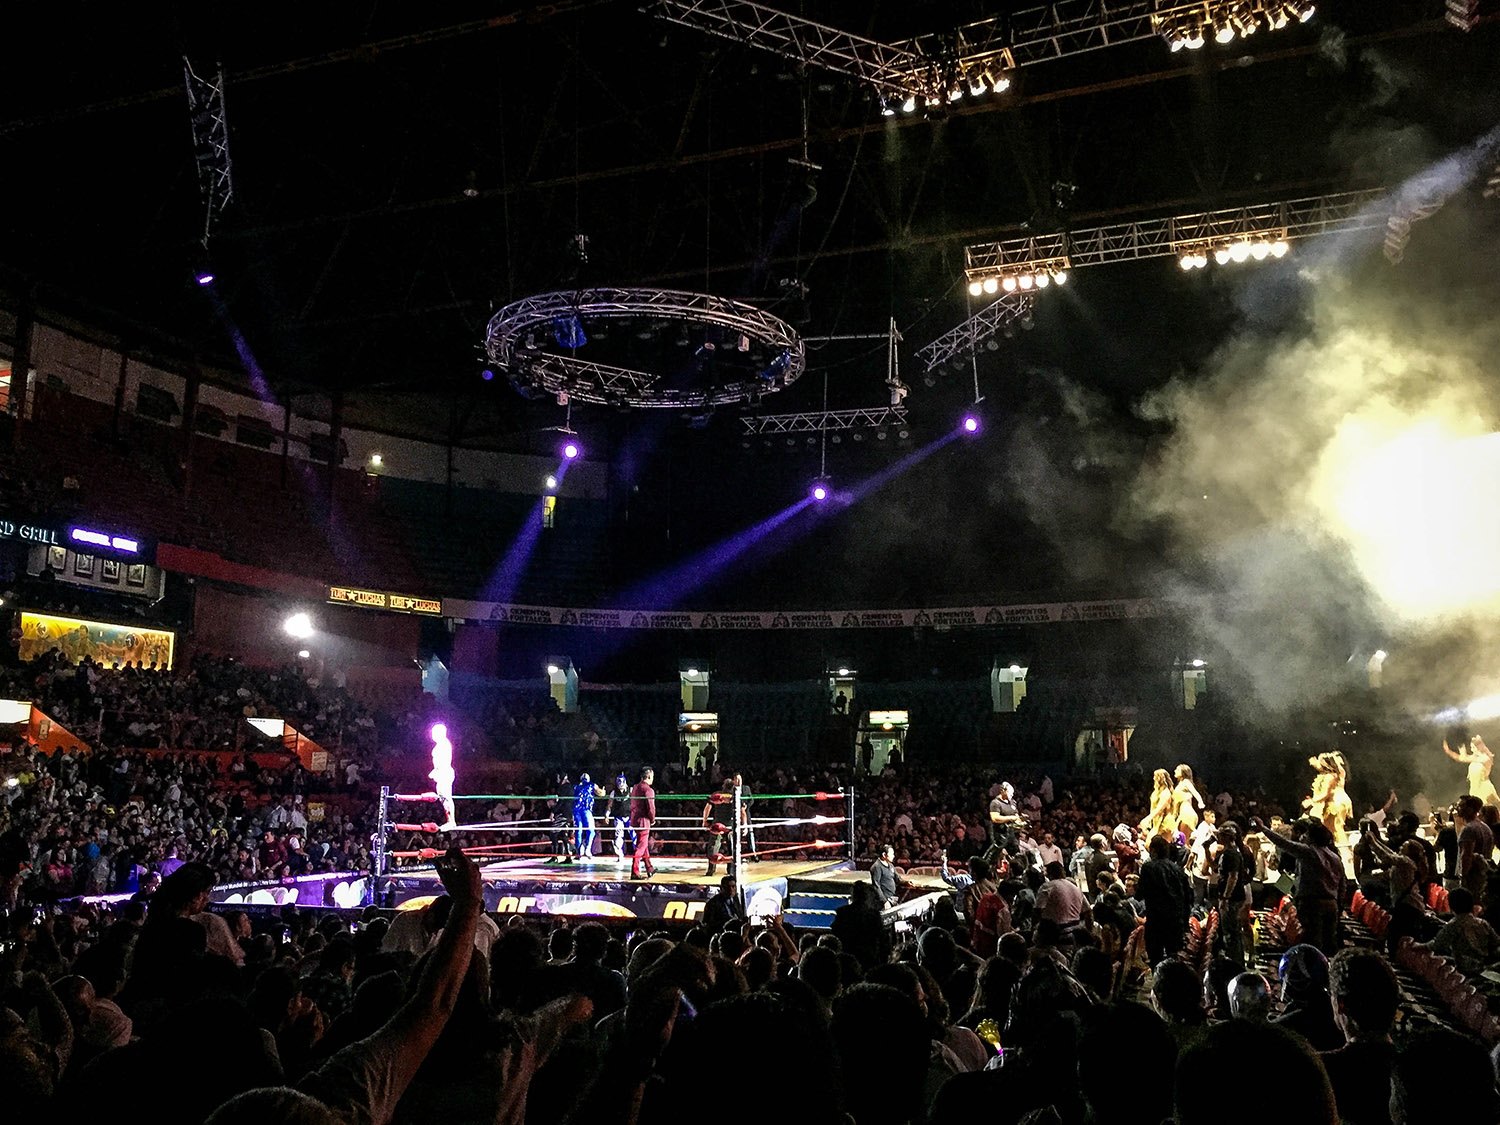 Lucha Libre in Mexico City Without a Tour Wrestling Ring